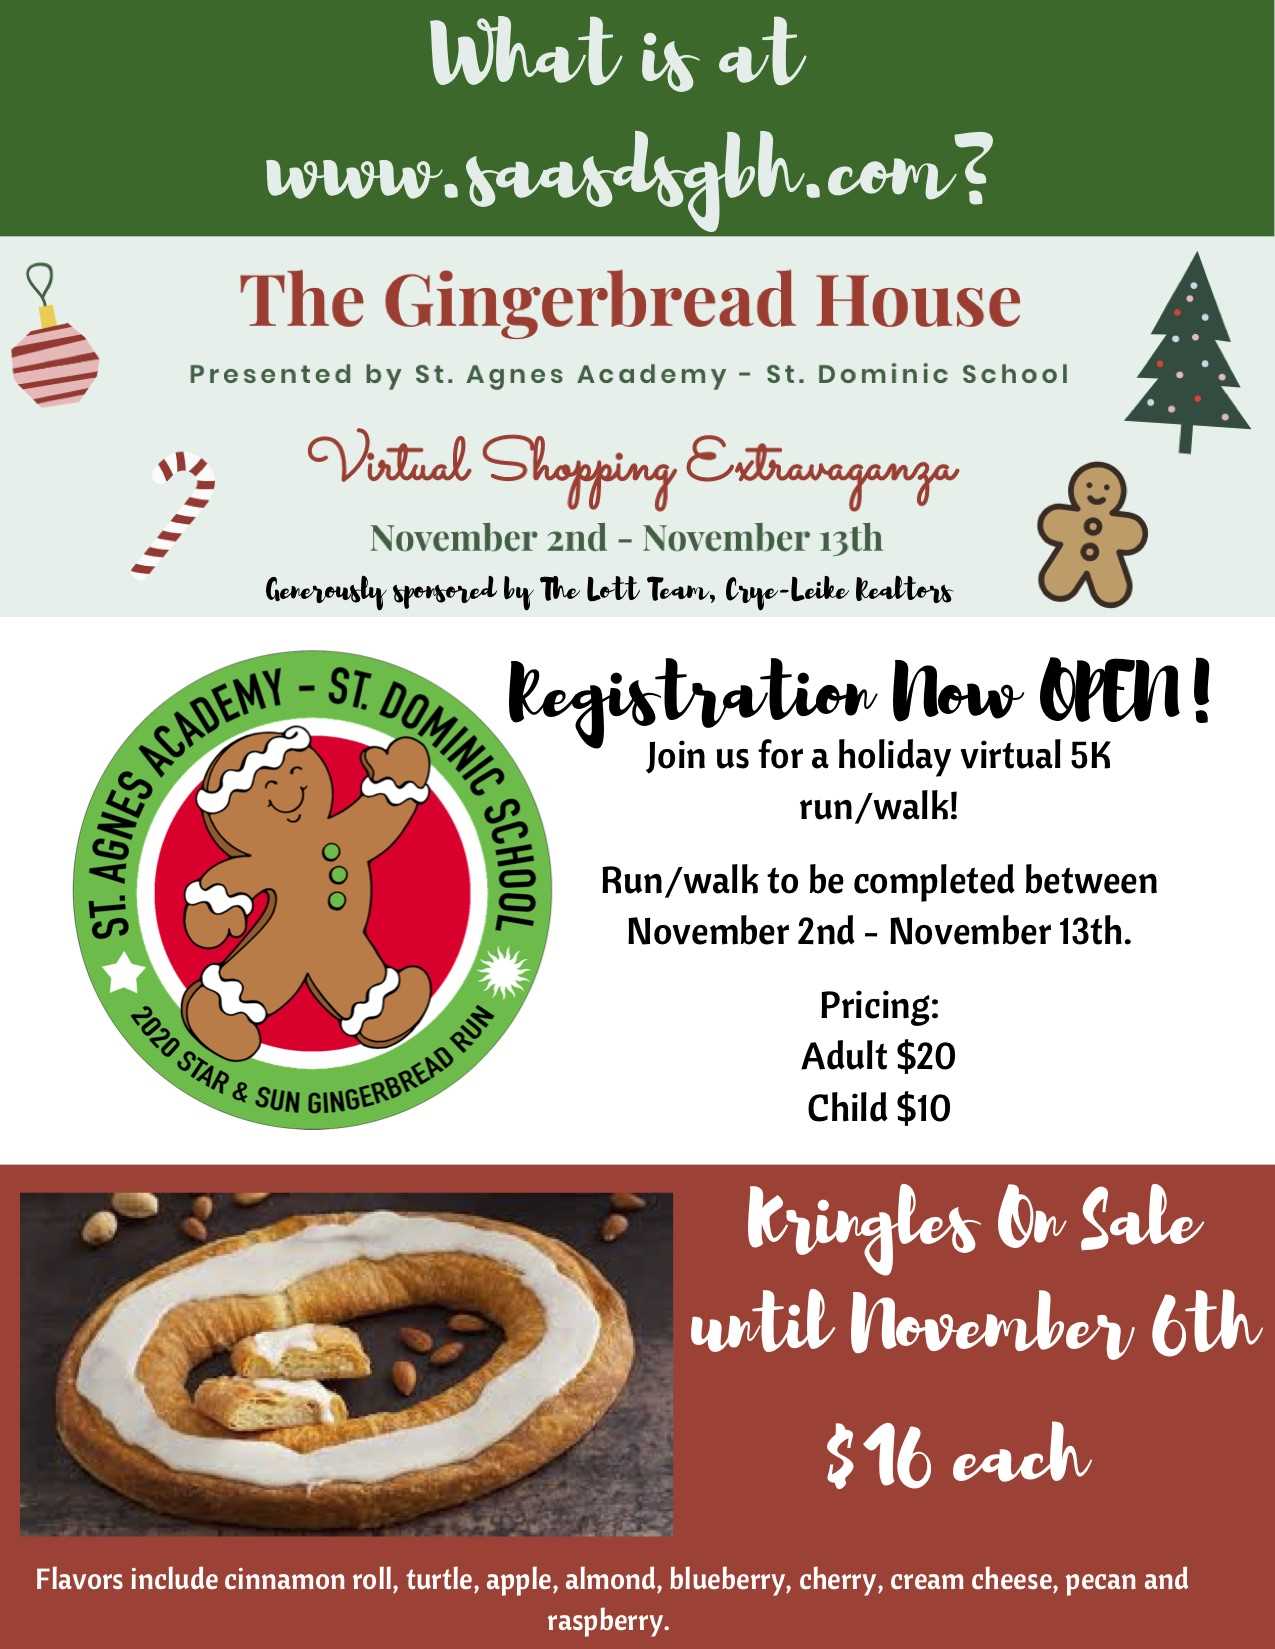 Gingerbread House is Open! 